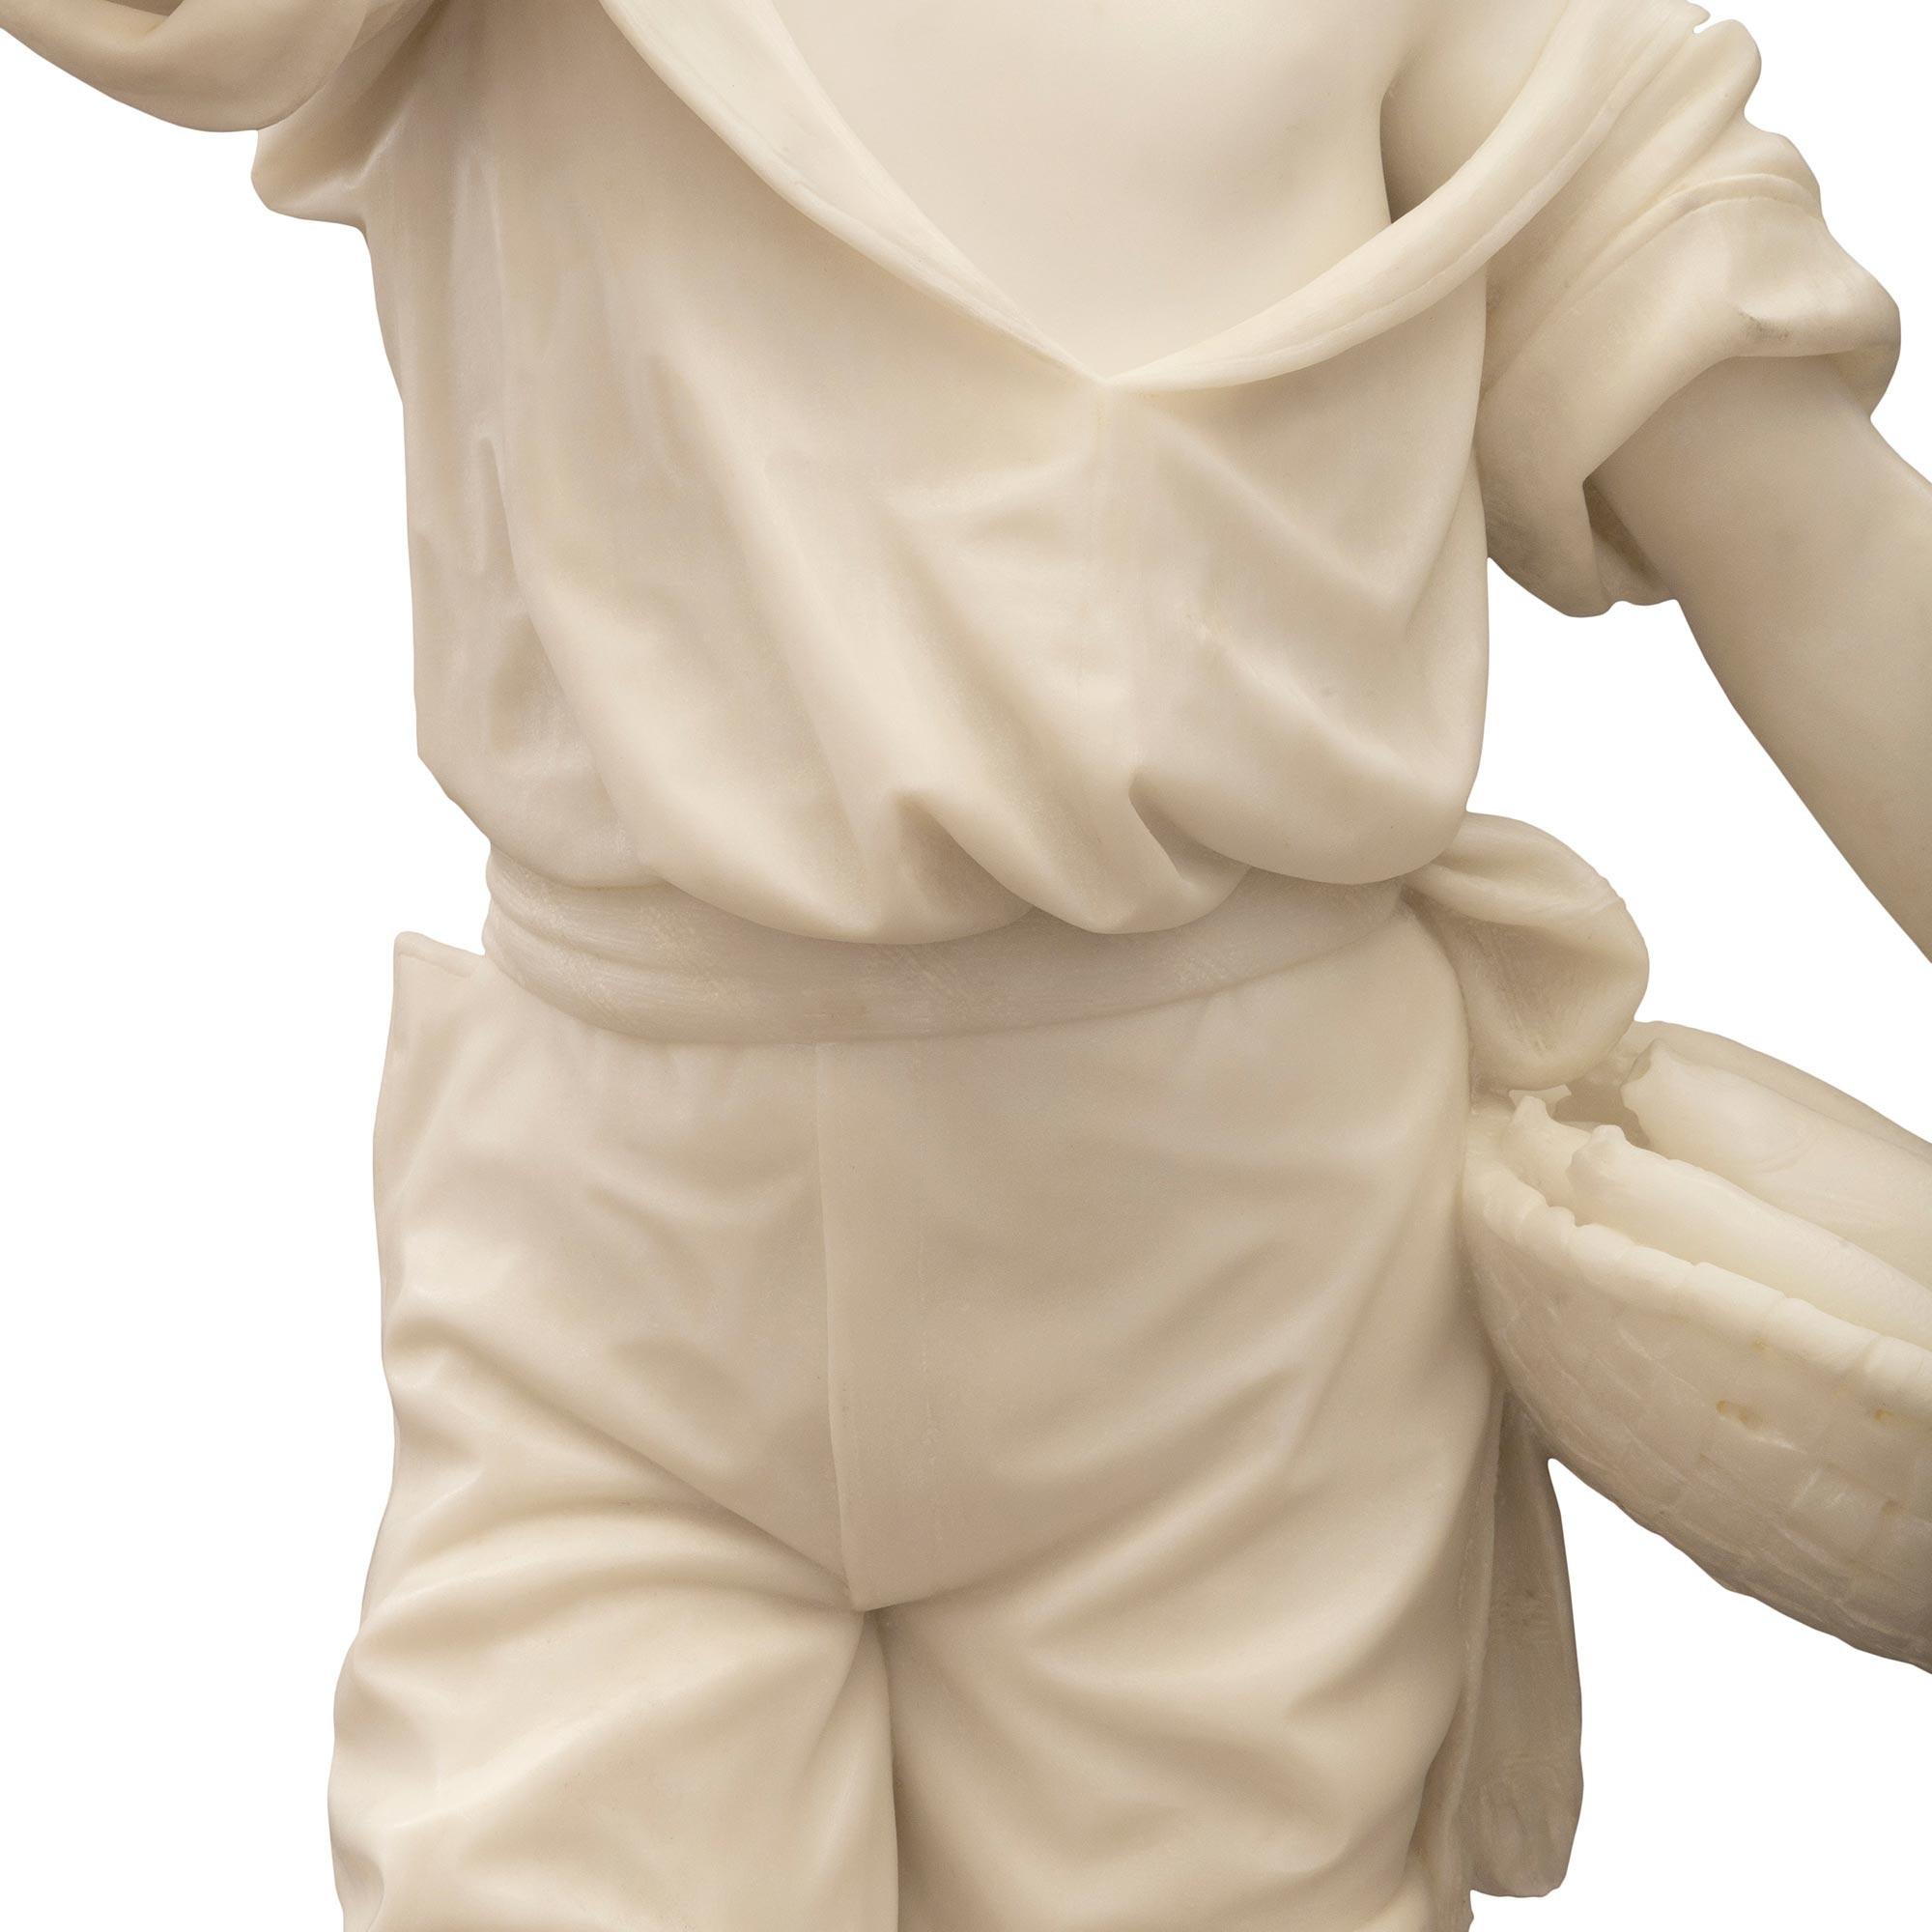 Italian 19th Century Solid White Carrara Marble Statue of a Young Fisherman For Sale 2